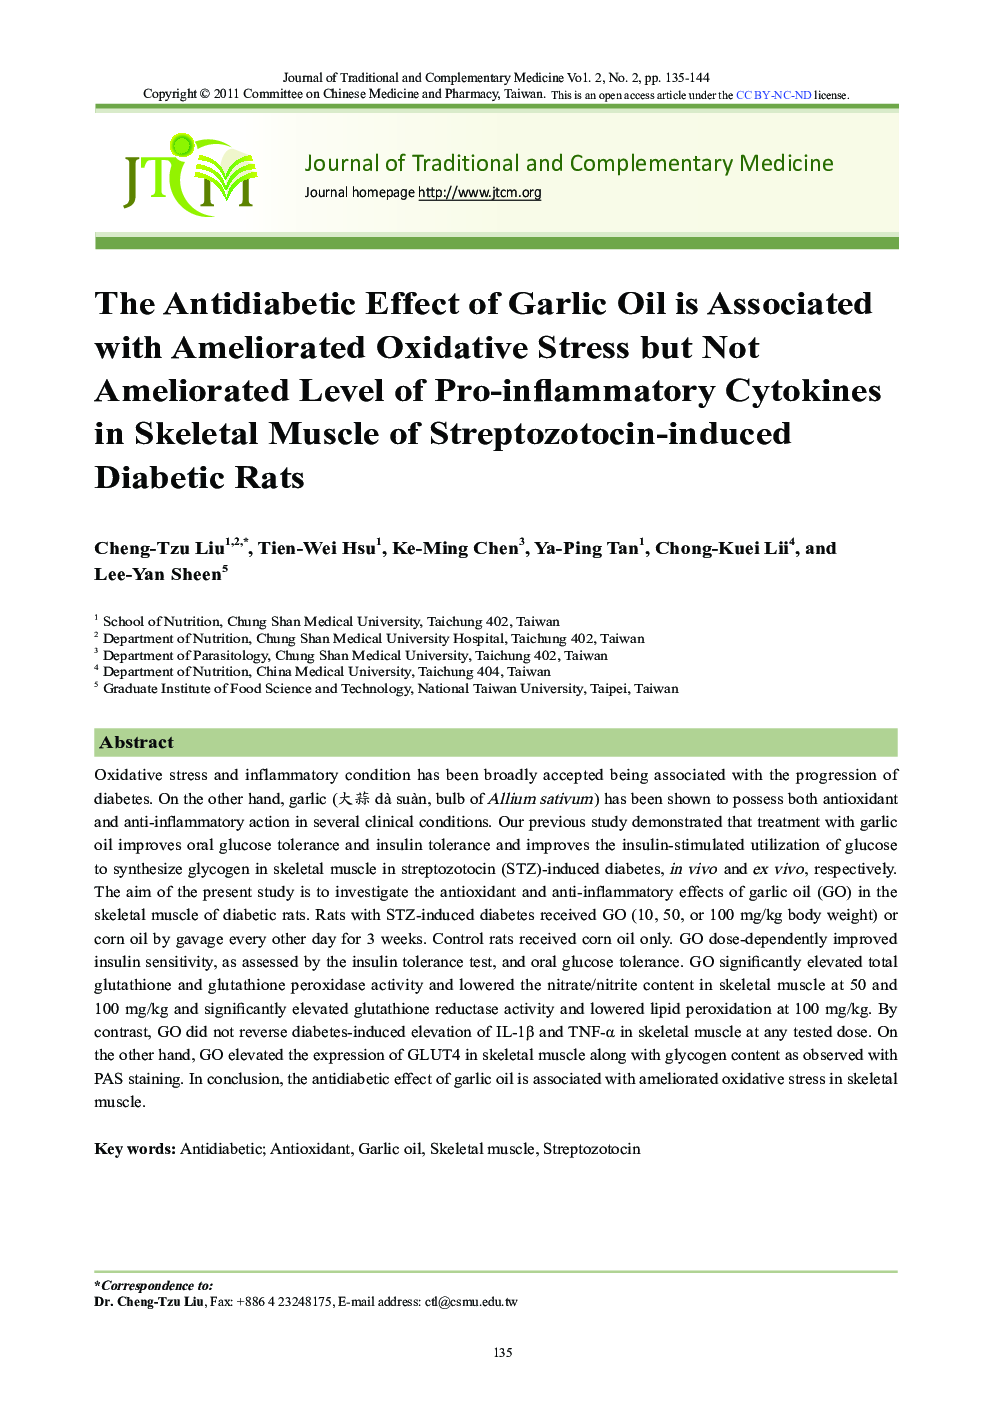 The Antidiabetic Effect of Garlic Oil is Associated with Ameliorated Oxidative Stress but Not Ameliorated Level of Pro-inflammatory Cytokines in Skeletal Muscle of Streptozotocin-induced Diabetic Rats